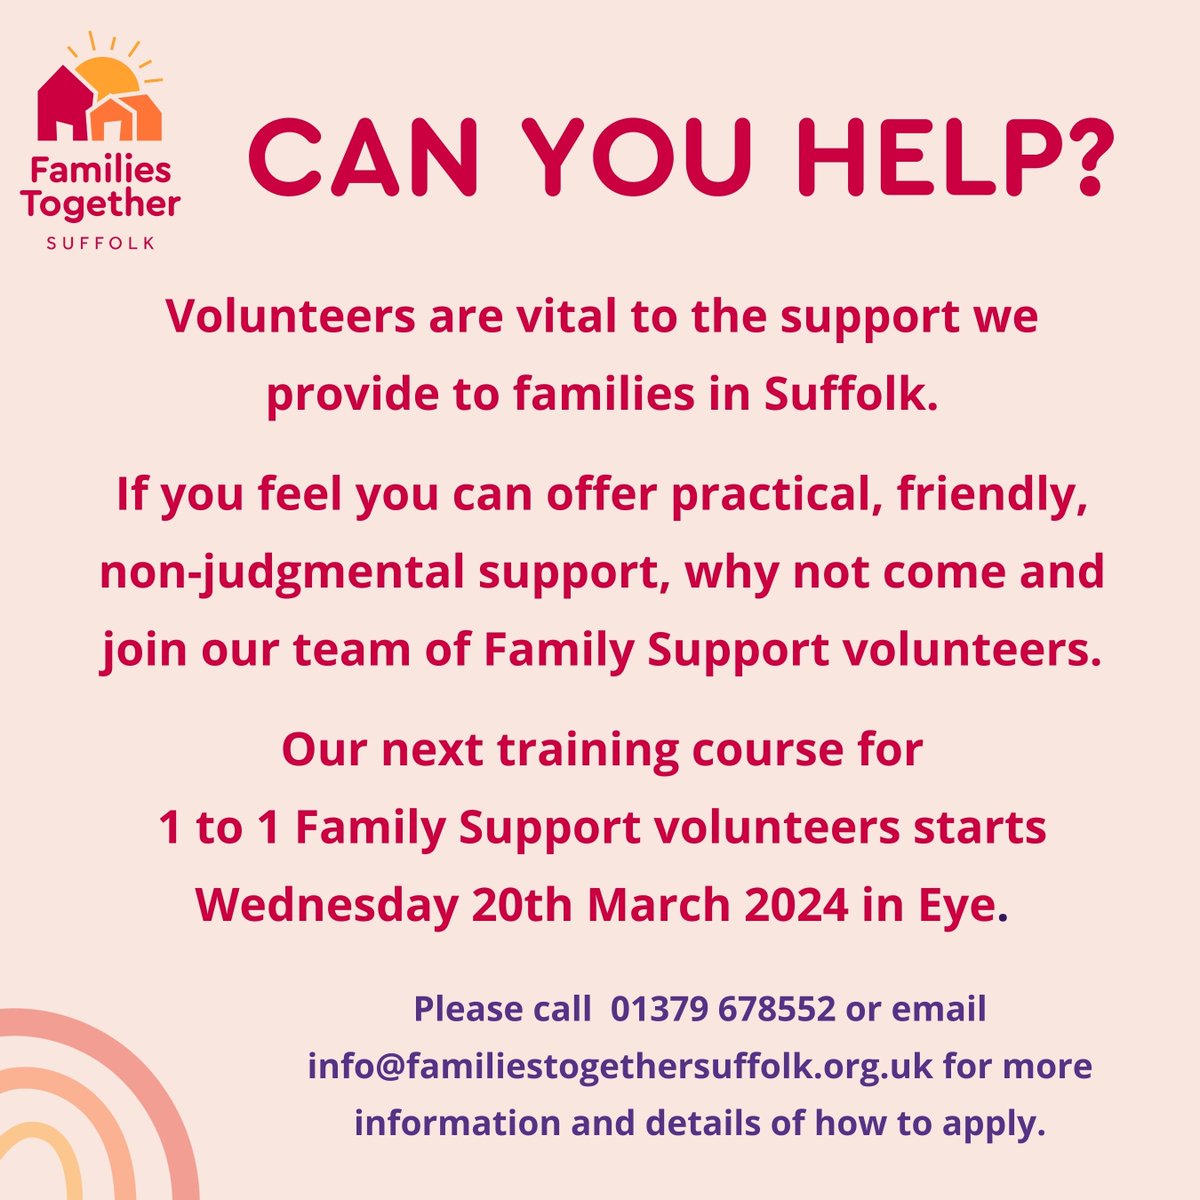 Can you help? If you can offer practical, friendly, non-judgmental support, why not come & join our Family Support team of volunteers. Our next course for volunteers starts 20th March 2024. Call 01379 678552 or email info@familiestogethersuffolk.org.uk for more info👍